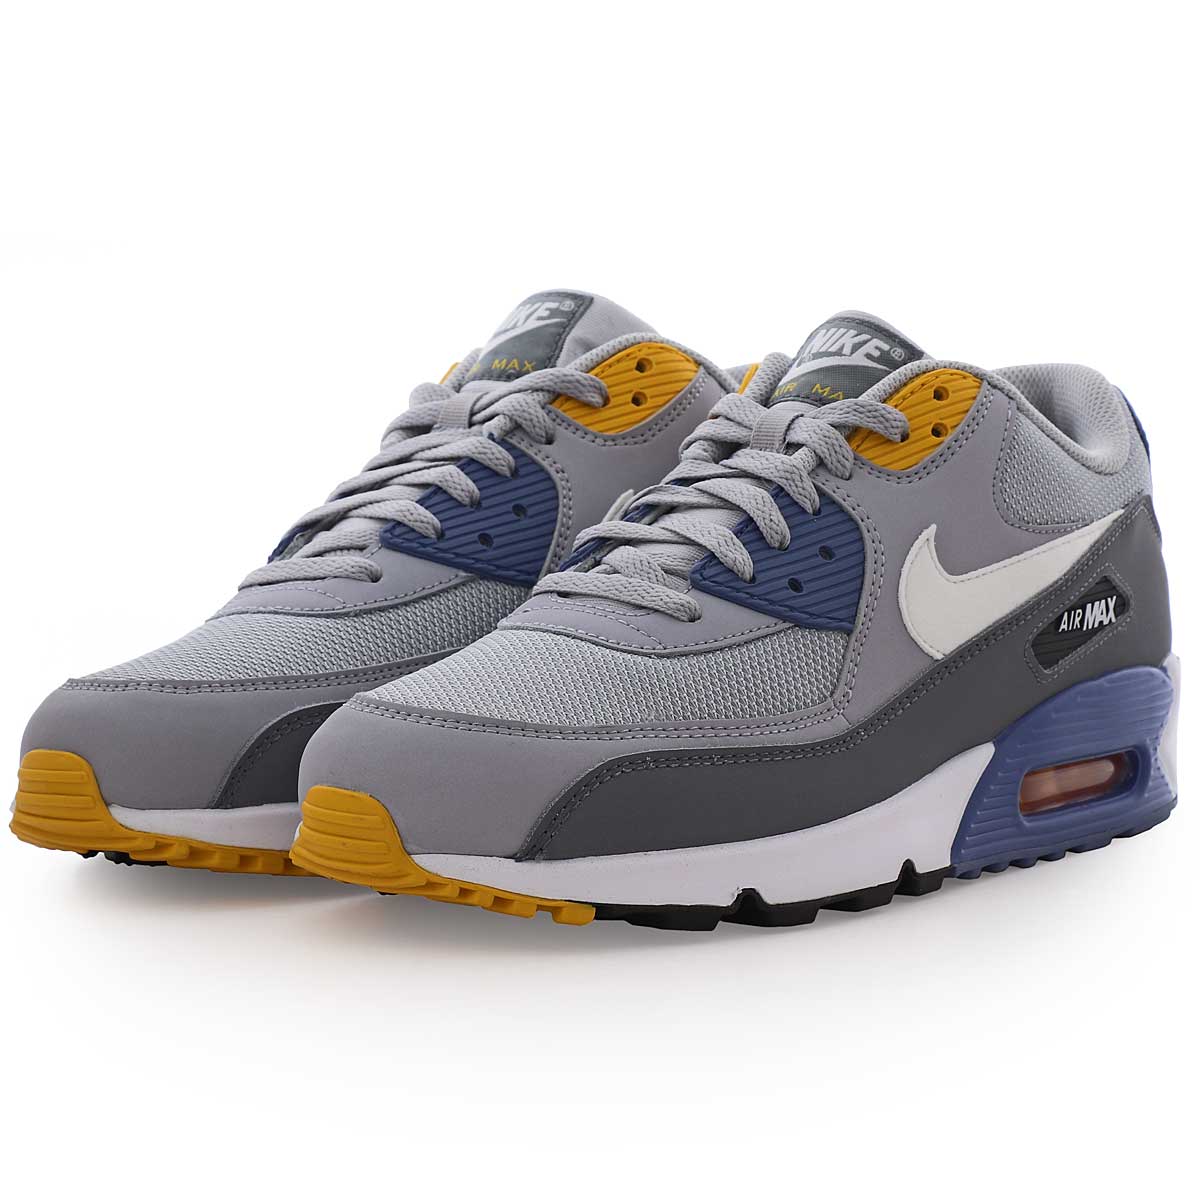 Smederij BES zondag Buy AIR MAX 90 ESSENTIAL for N/A 0.0 on KICKZ.com!